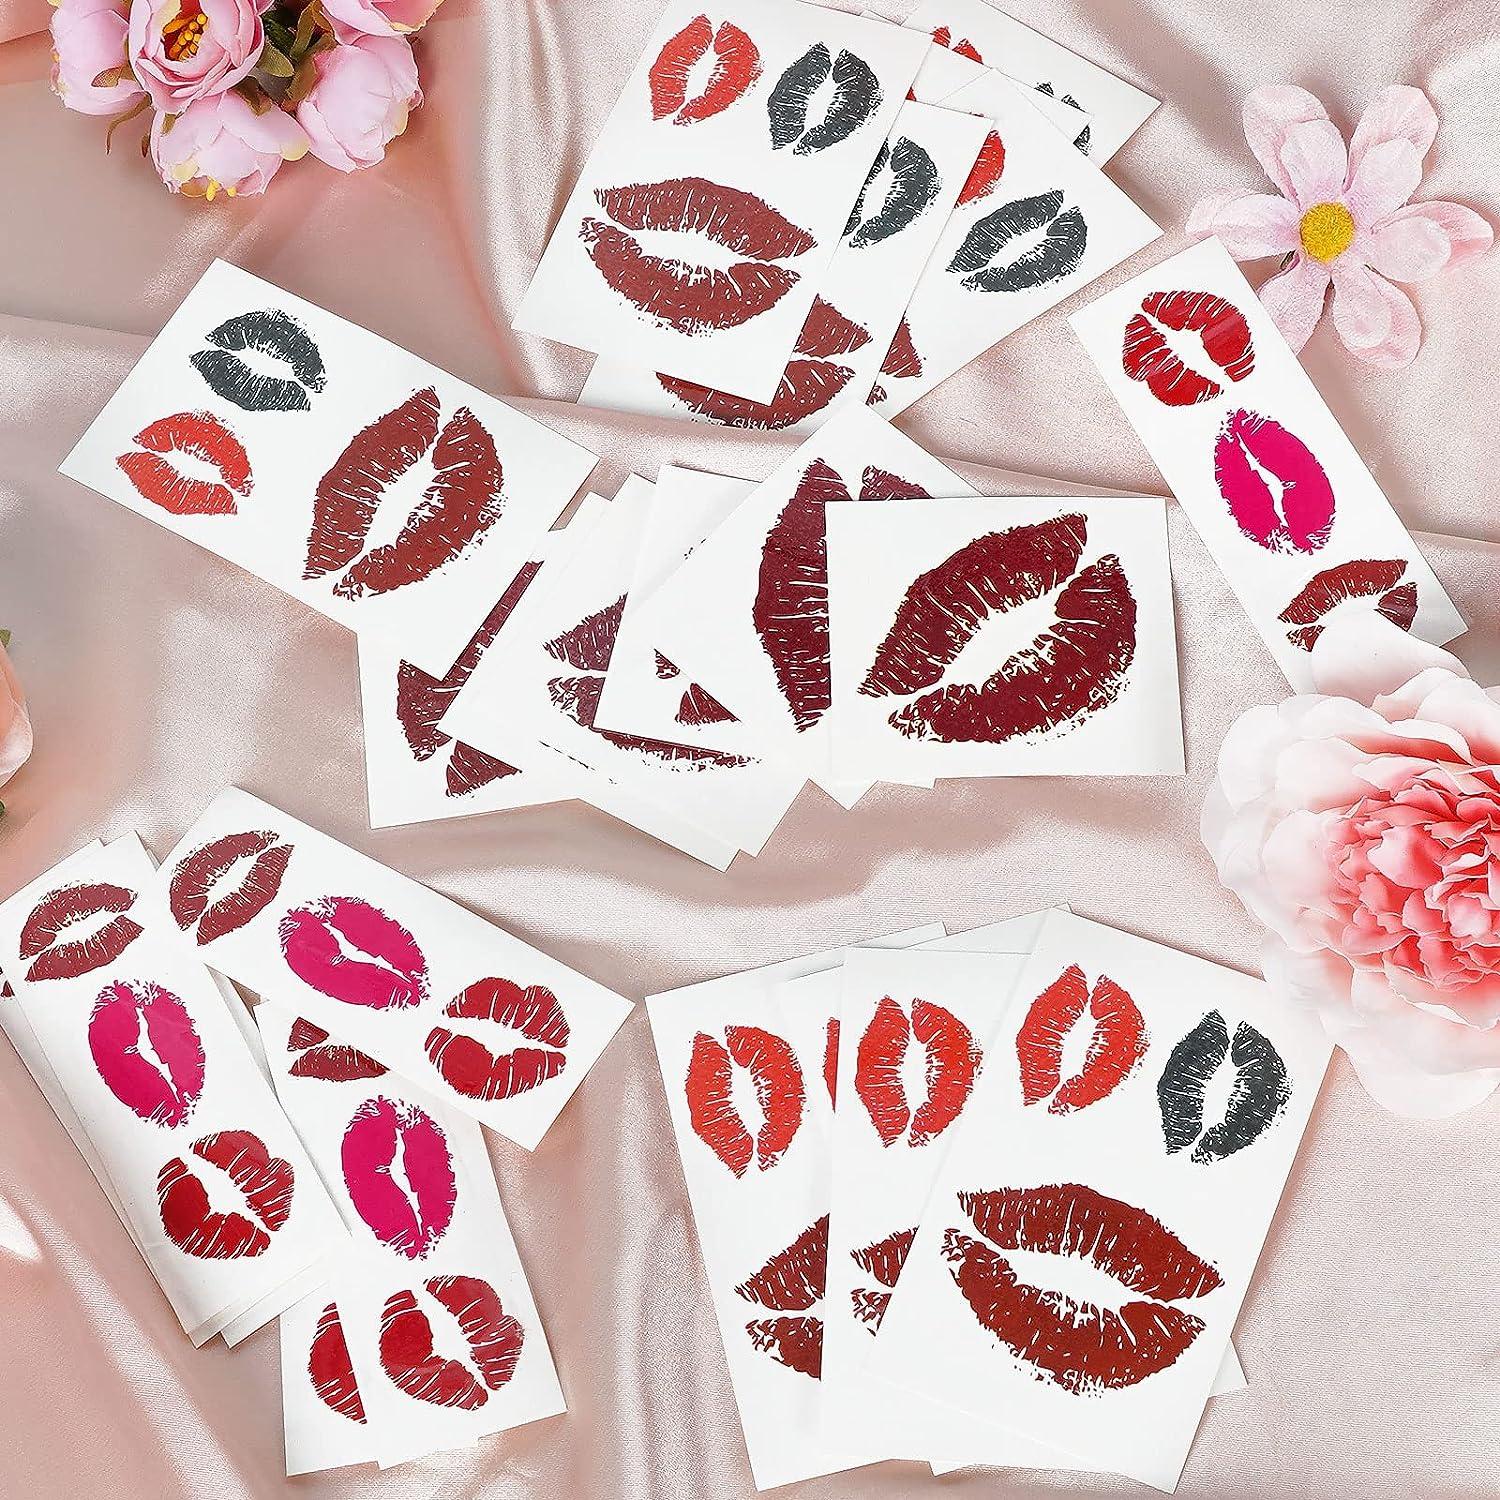 Temporary Lip Tattoos…Are you daring enough to try them? | CrimsonCrushxoxo